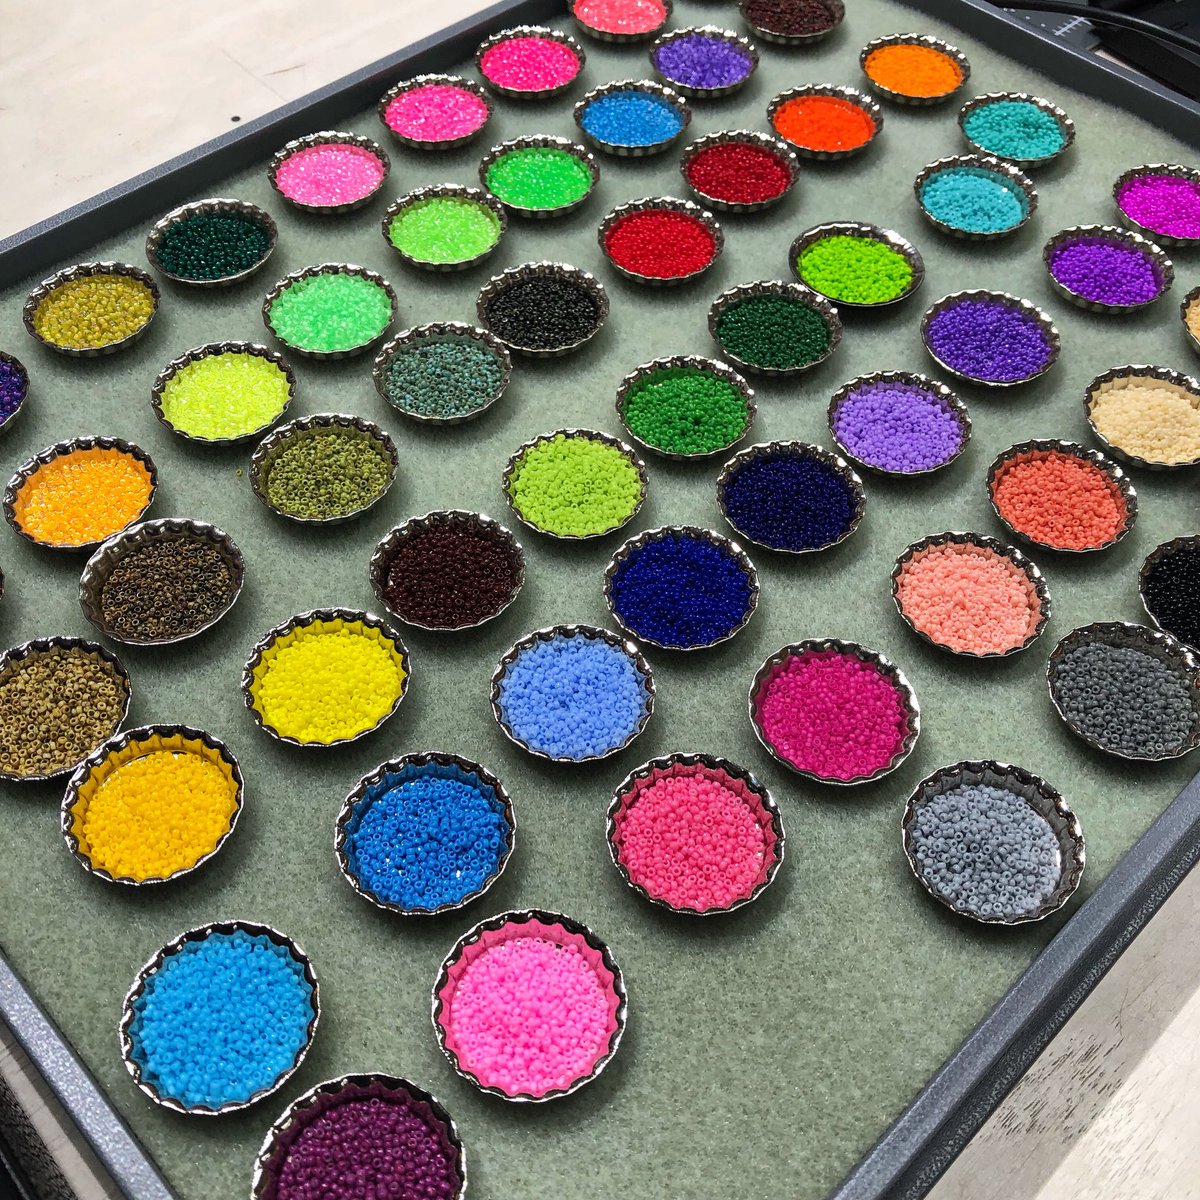 We’re taking pictures of our #japaneseseedbeads ❤️ almost ready to post on our website!!!! #miyukibeads #tohobeads #size15beads #size11beads #japanesebeads #beadsbeadsbeads #nativeamericanbeading